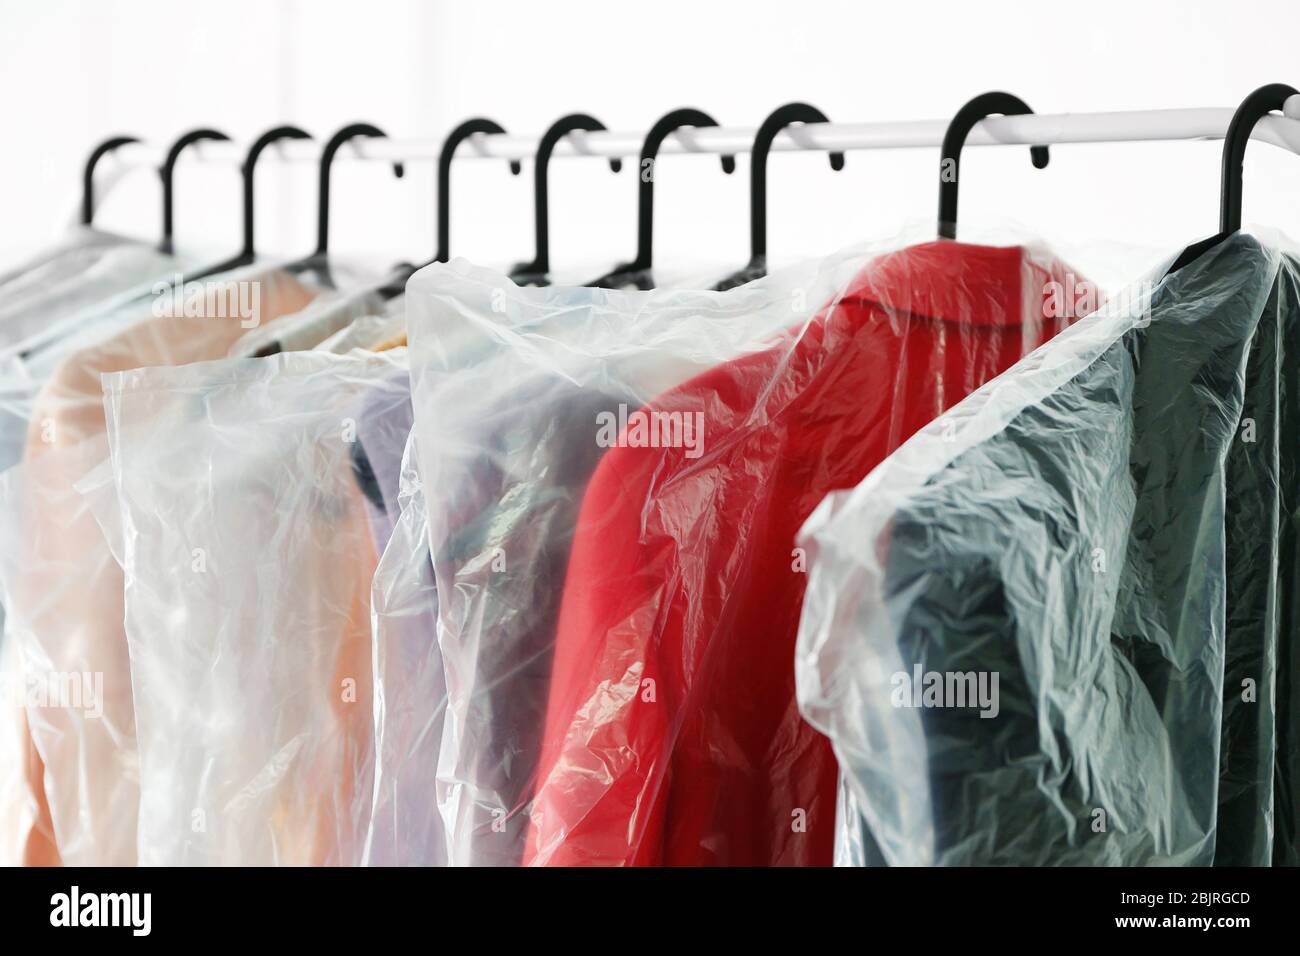 How to Clean Plastic Hangers